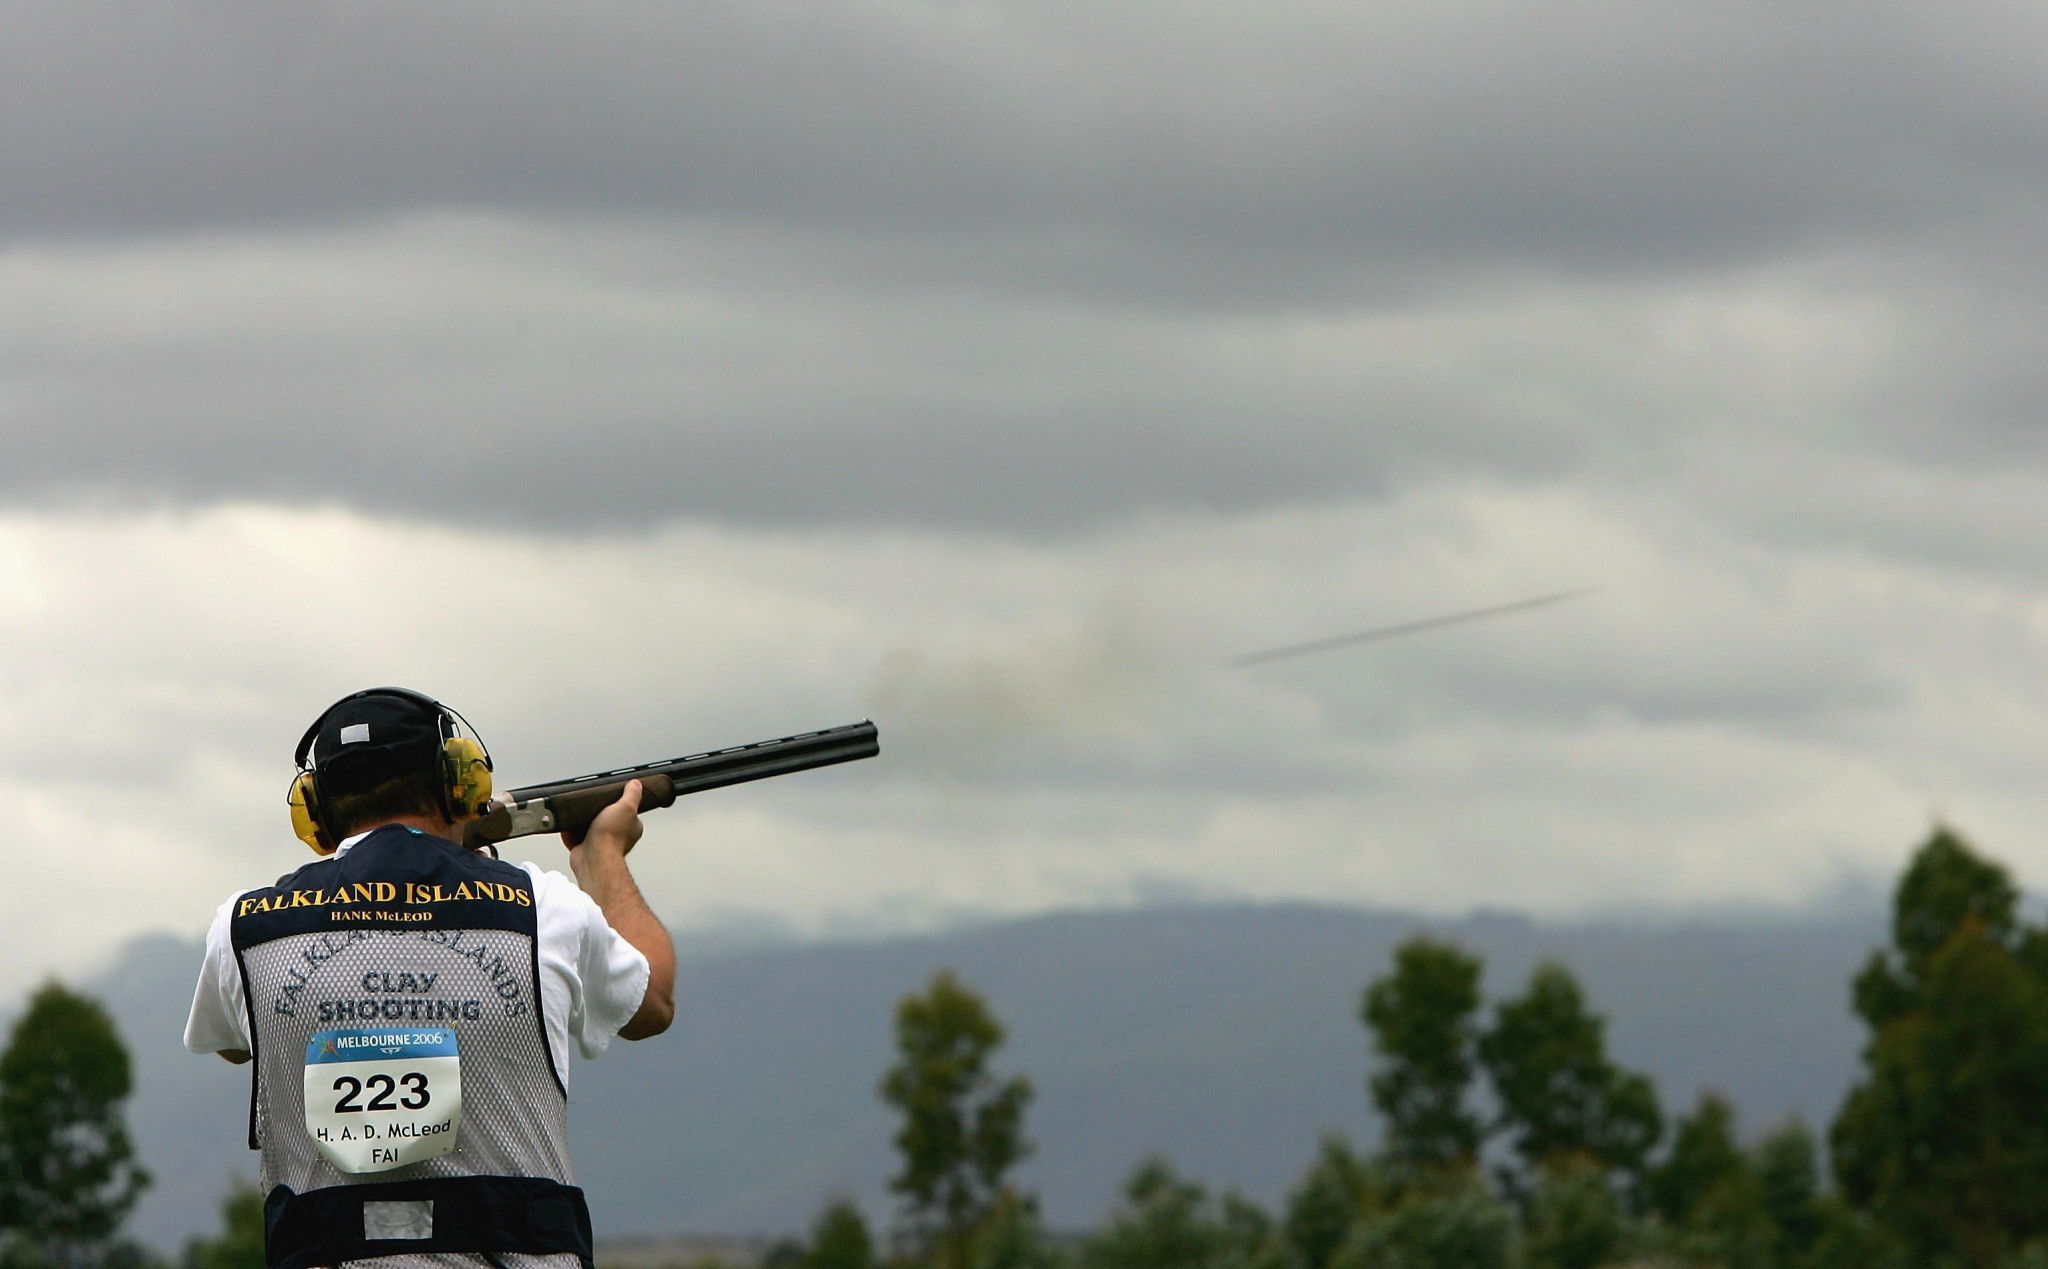 Falkland Islands sent 10 shooters to Gold Coast 2018, but the sport has been removed from the Commonwealth Games programme ©Getty Images